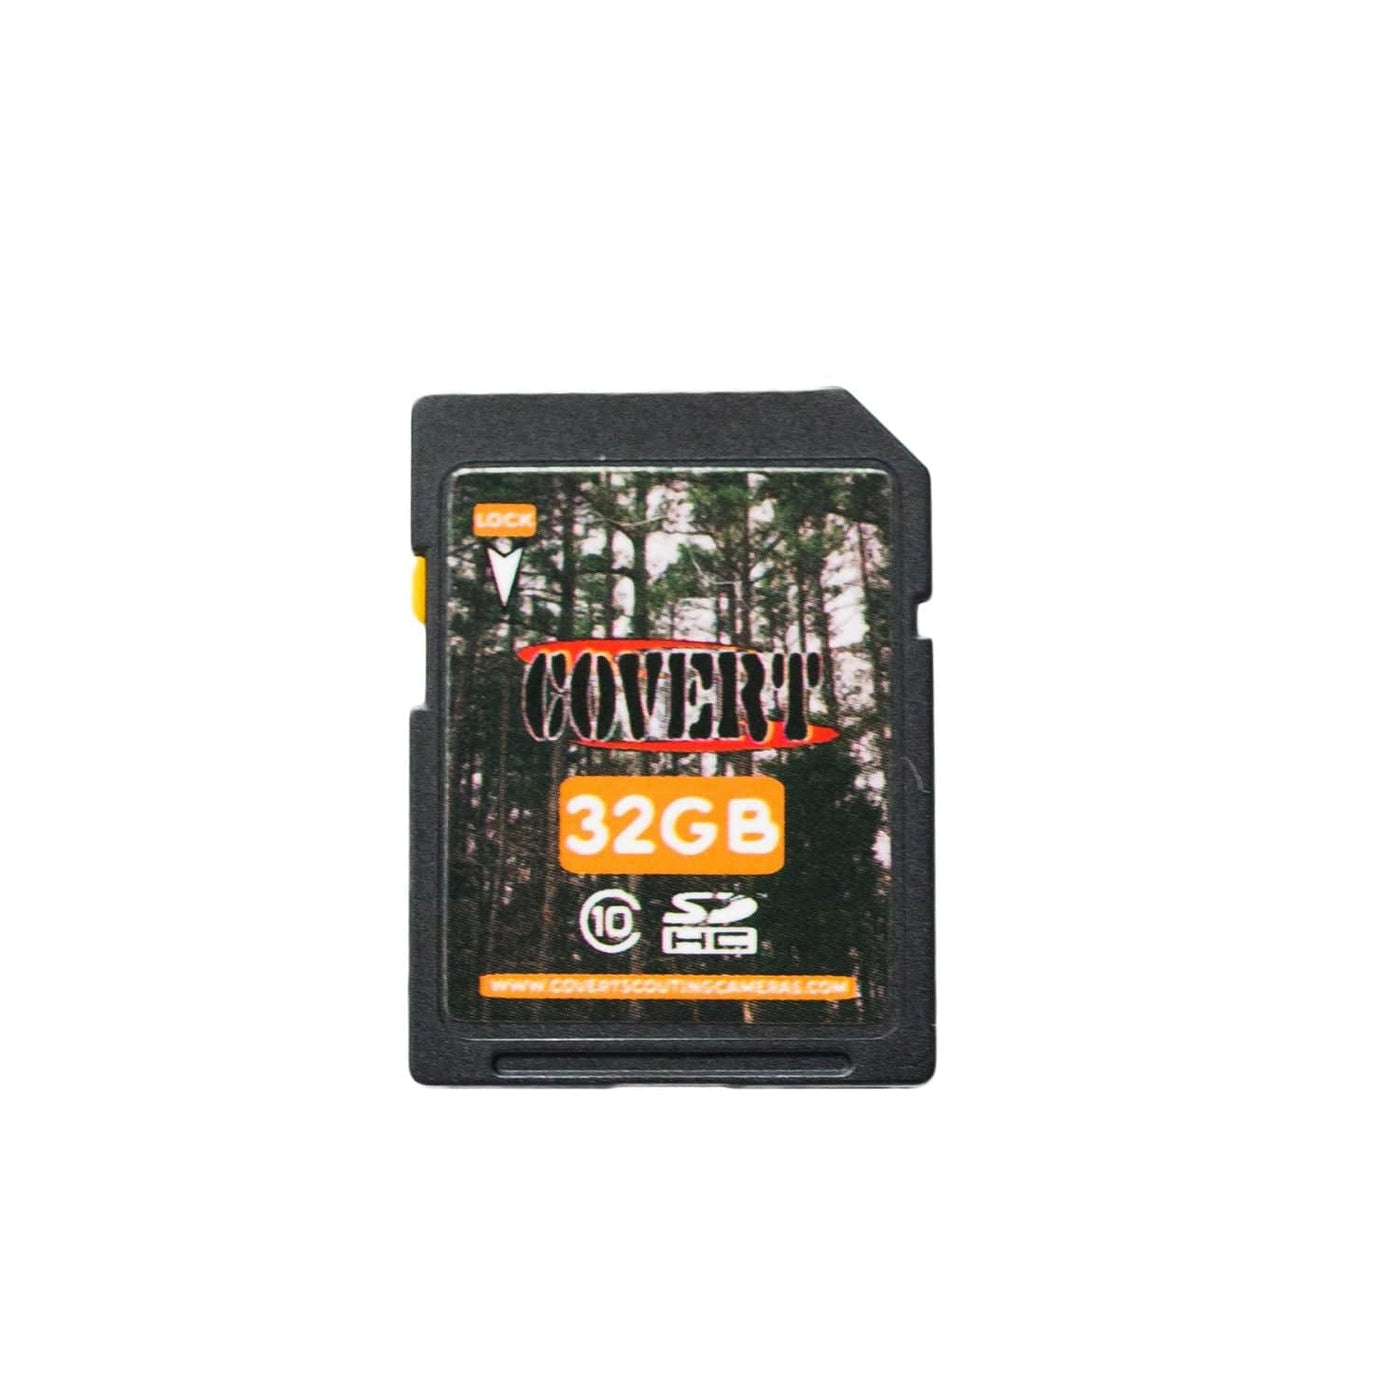 Covert Scouting Cameras Covert SD Card 32 Gb Hunting